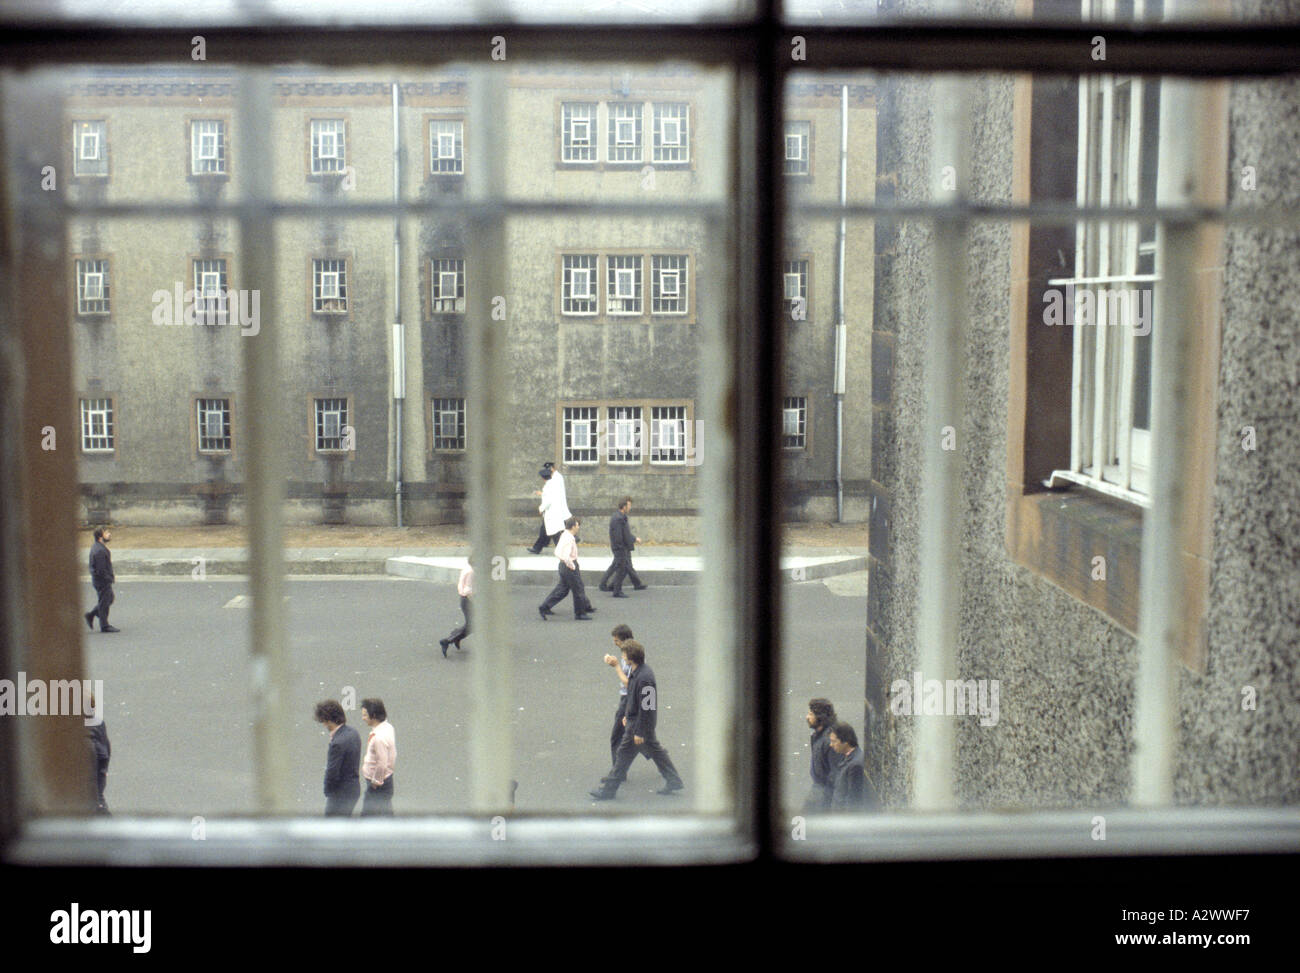 Prisoners in the exercise yard at Saughton Prison, seen through a window with bars, Scotland Stock Photo